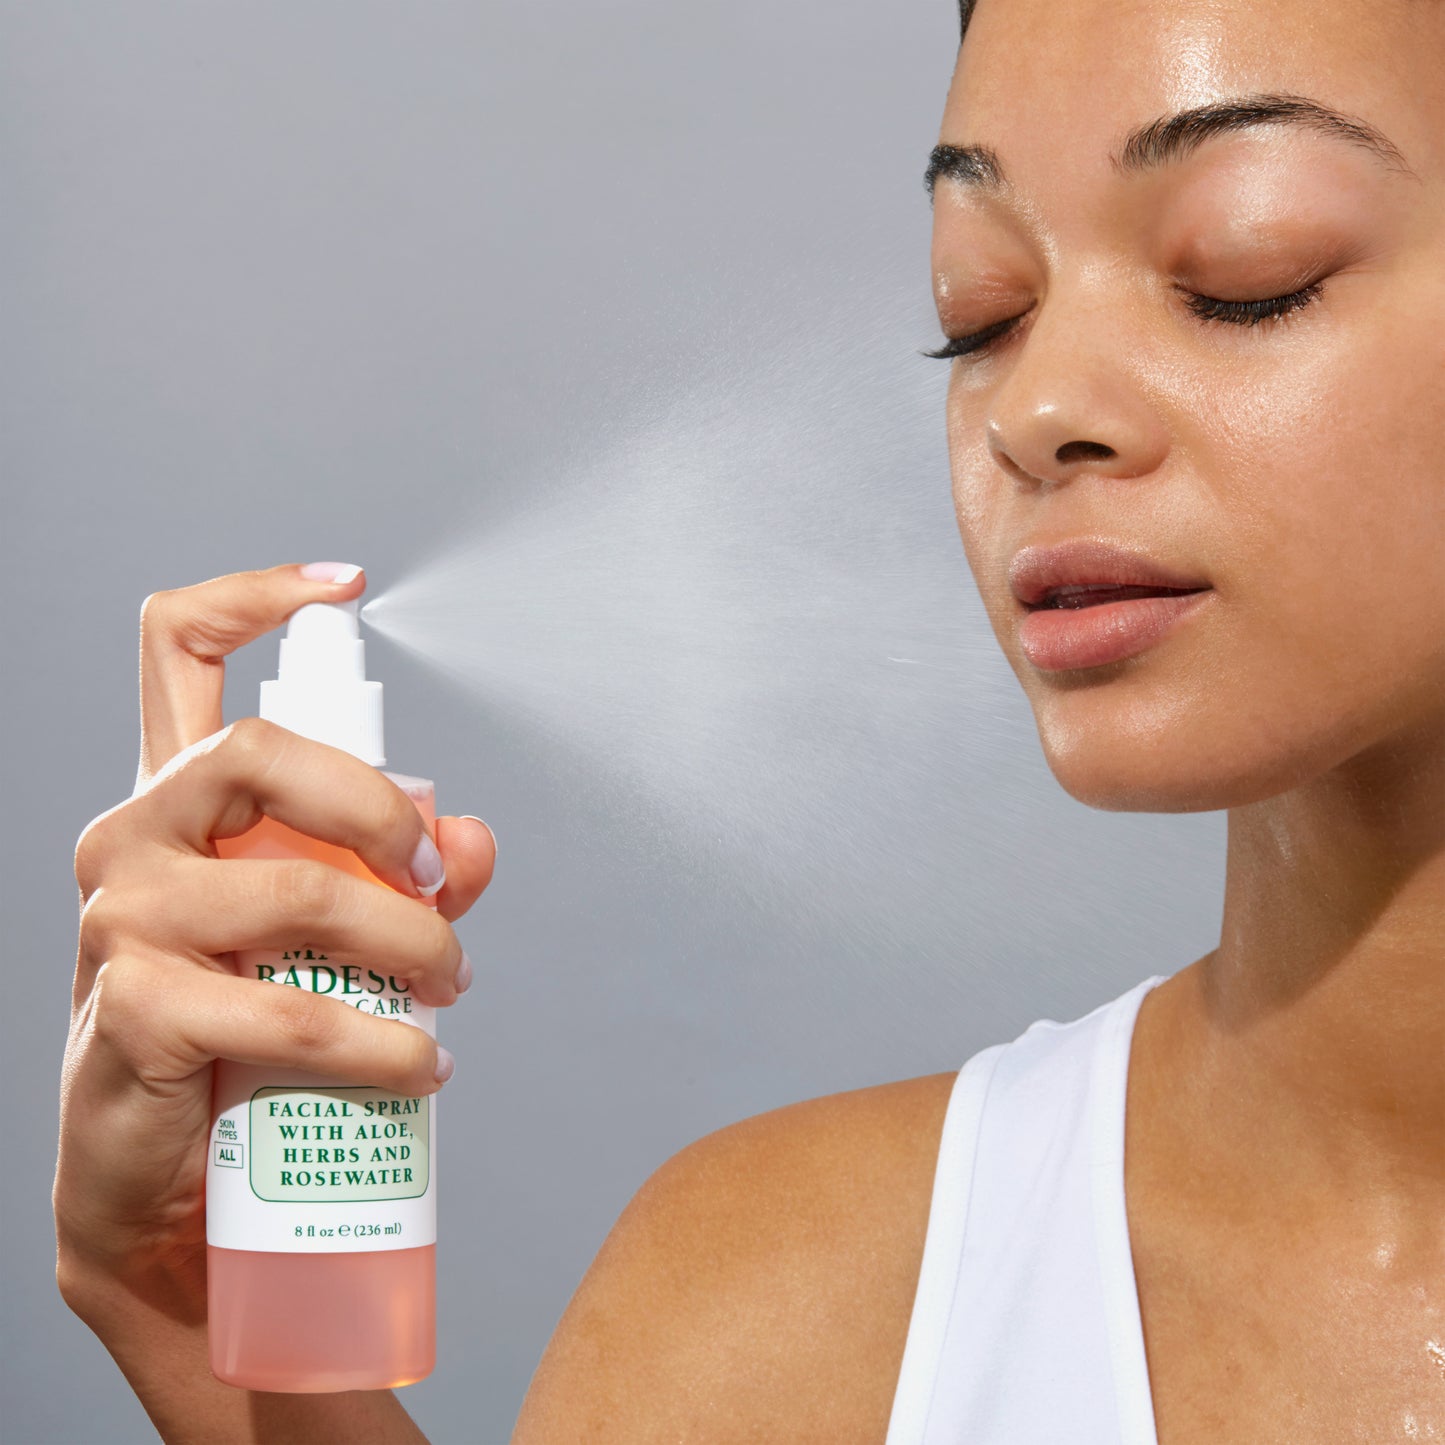 Woman misting with glowing skin Facial Spray With Aloe, Herbs, Rosewater onto her face